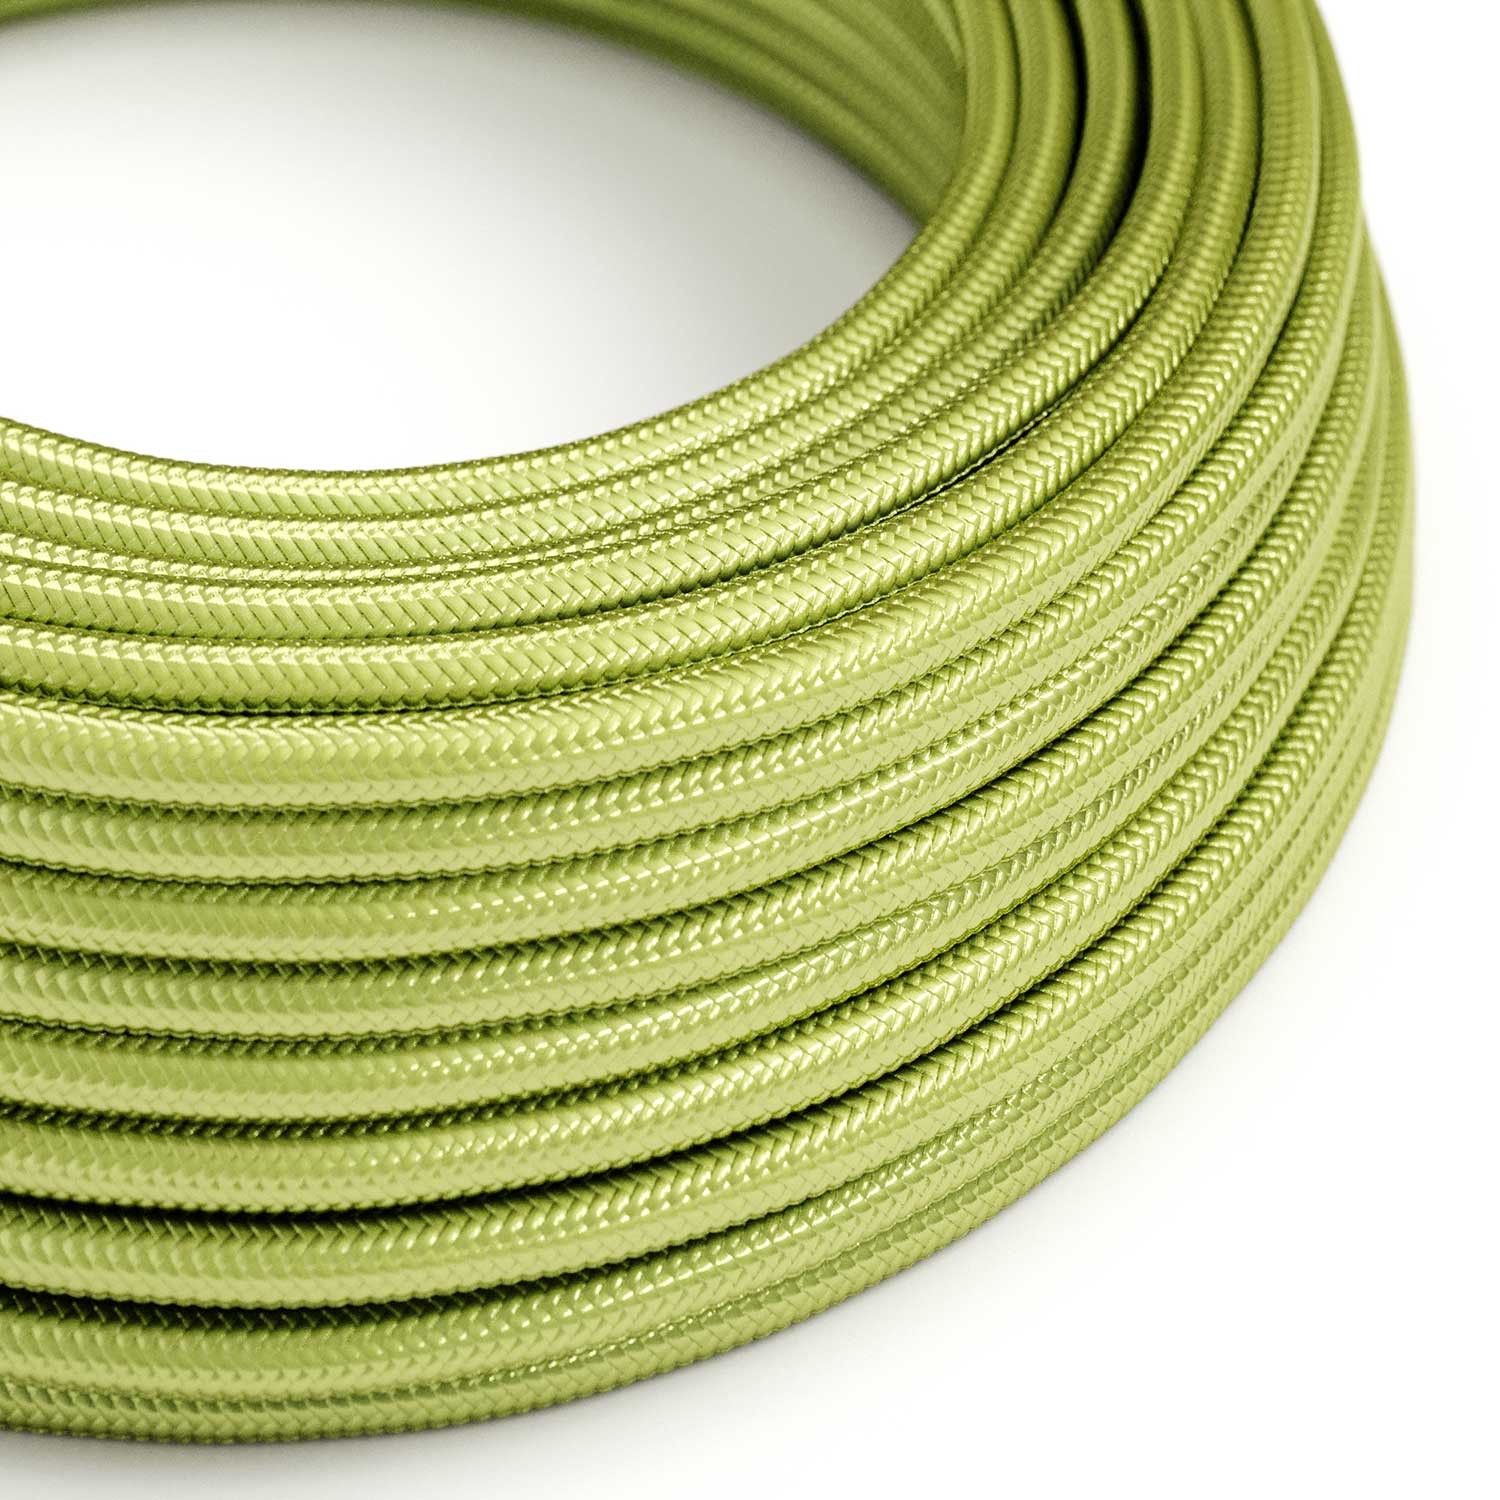 RM32 Kiwi Round Rayon Electrical Fabric Cloth Cord Cable